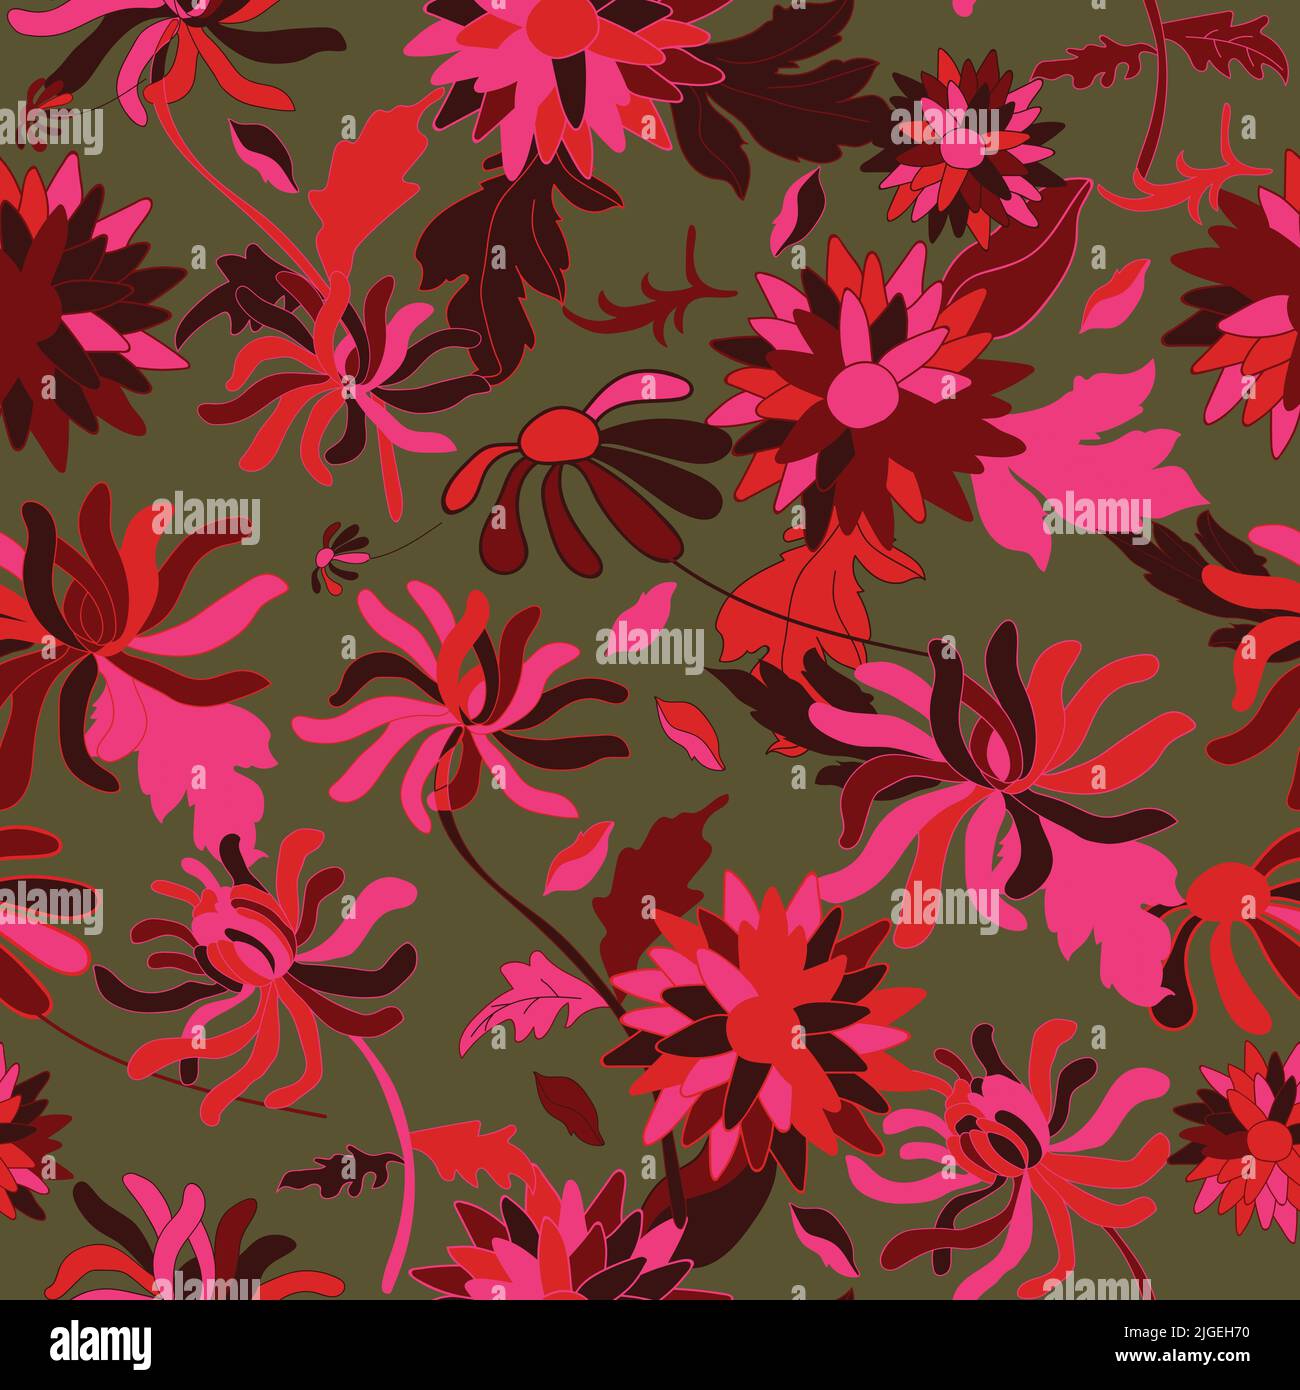 Seamless pattern with chrysanthemum flowers. Perfect for floral fabric, decorative, textile and fashion print. Stock Vector